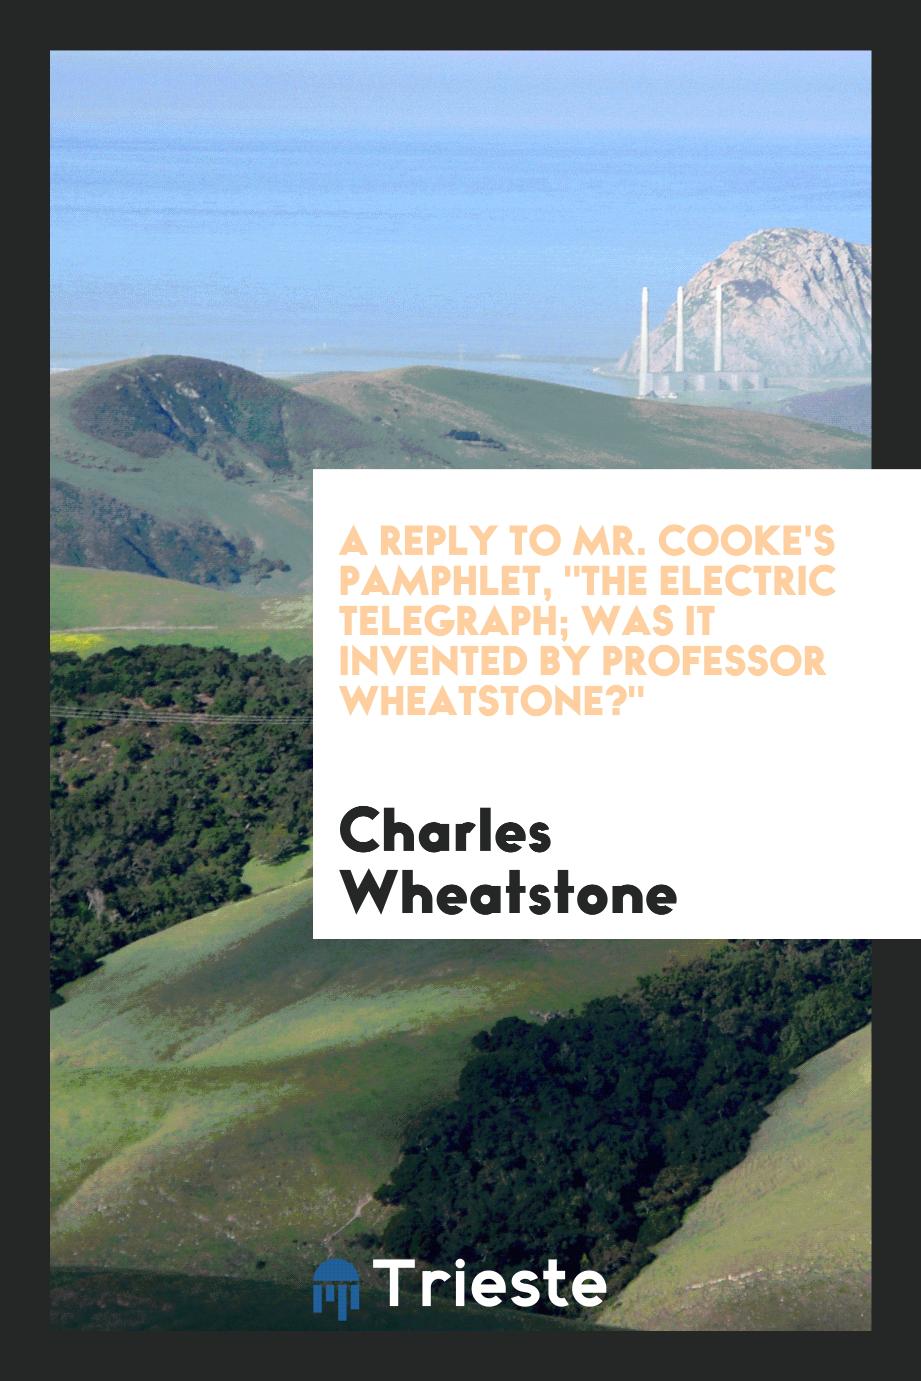 A Reply to Mr. Cooke's Pamphlet, "The Electric Telegraph; was it invented by professor Wheatstone?"